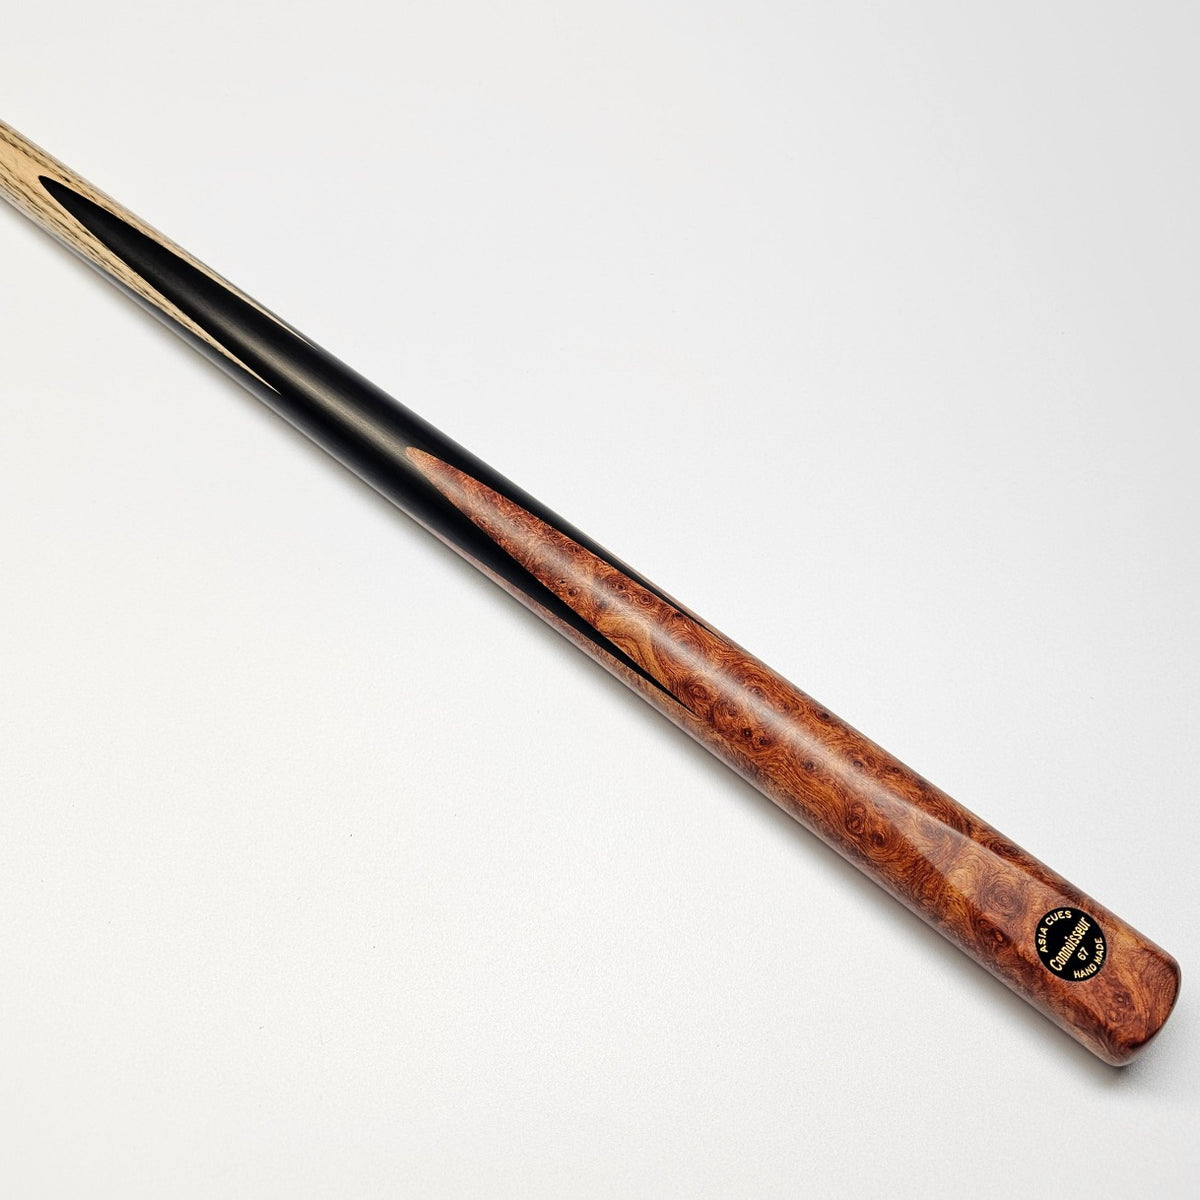 Asia Cues Connoisseurr 1 Piece Snooker Cue  Handmade Ebony Butt with 4 splices of Amboyna Burl. Butt View